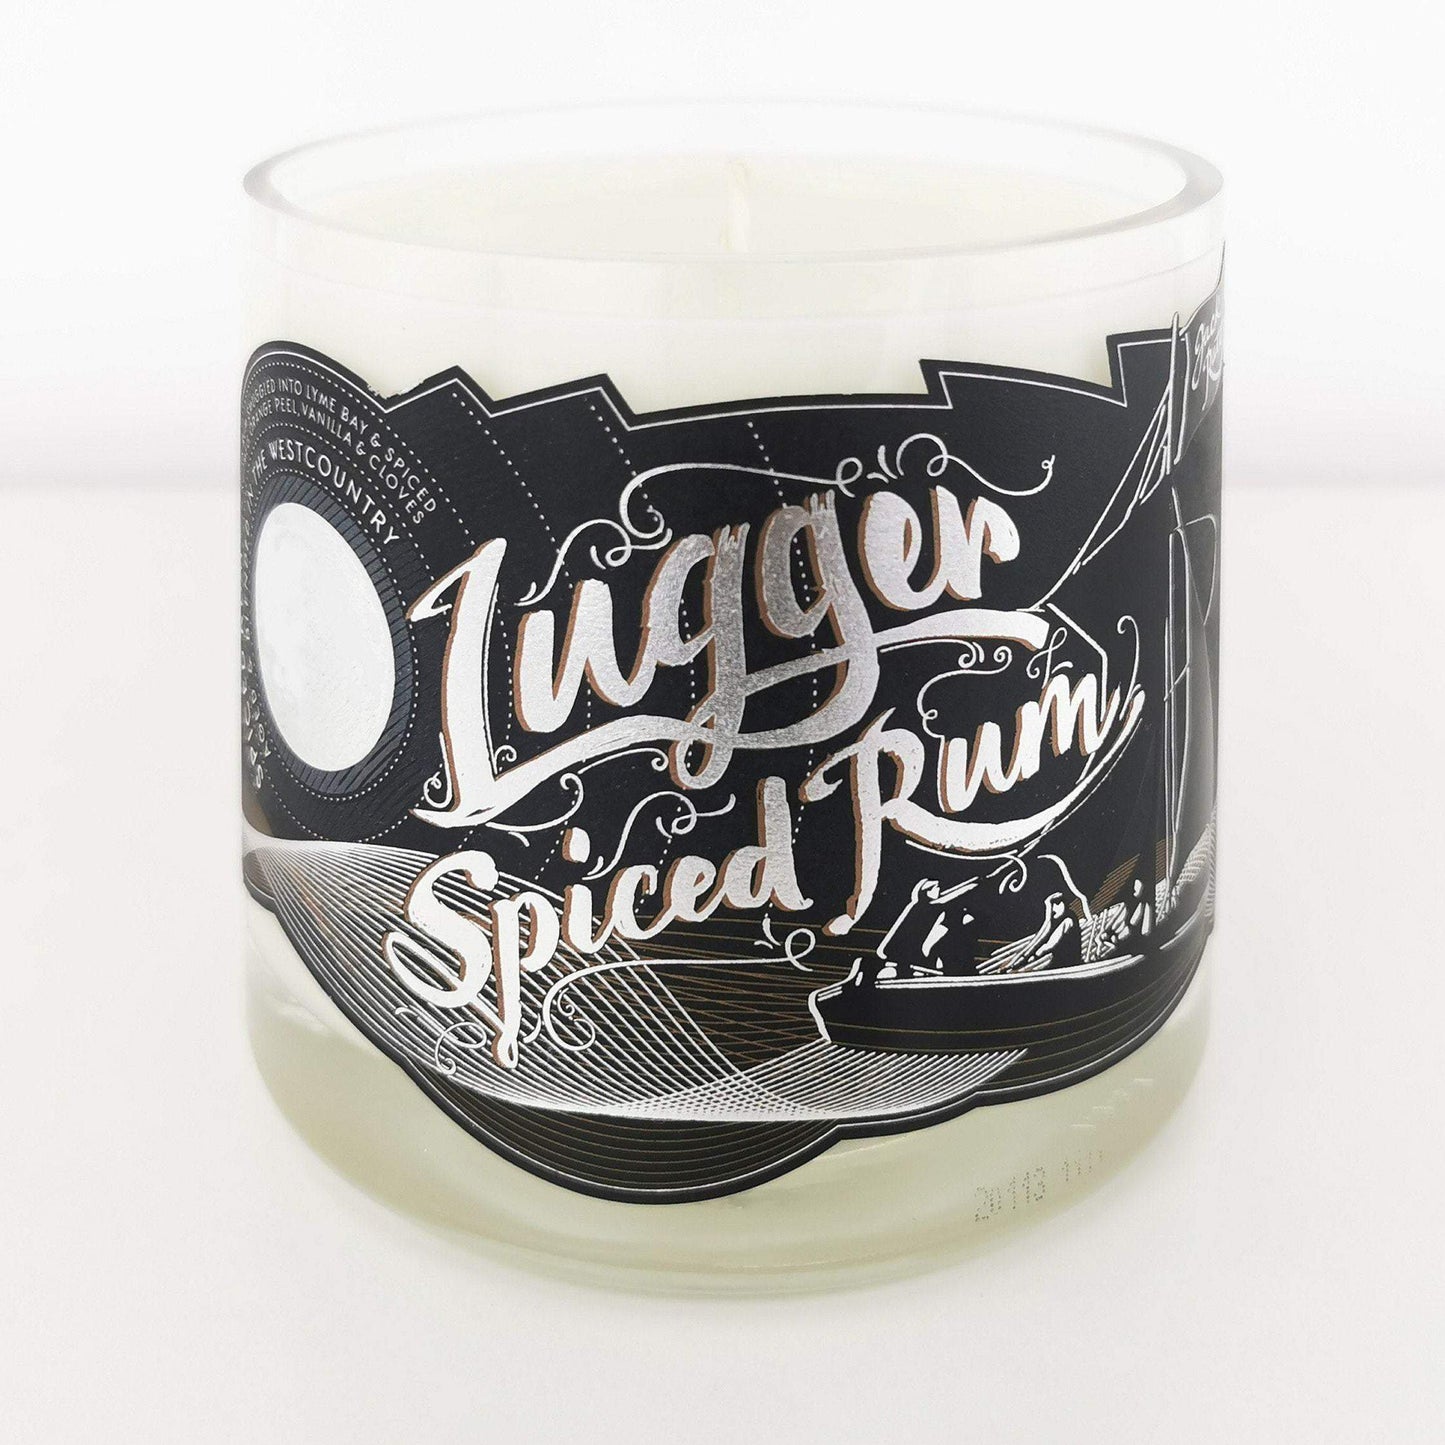 Lugger Spiced Rum Bottle Candle-Rum Bottle Candles-Adhock Homeware